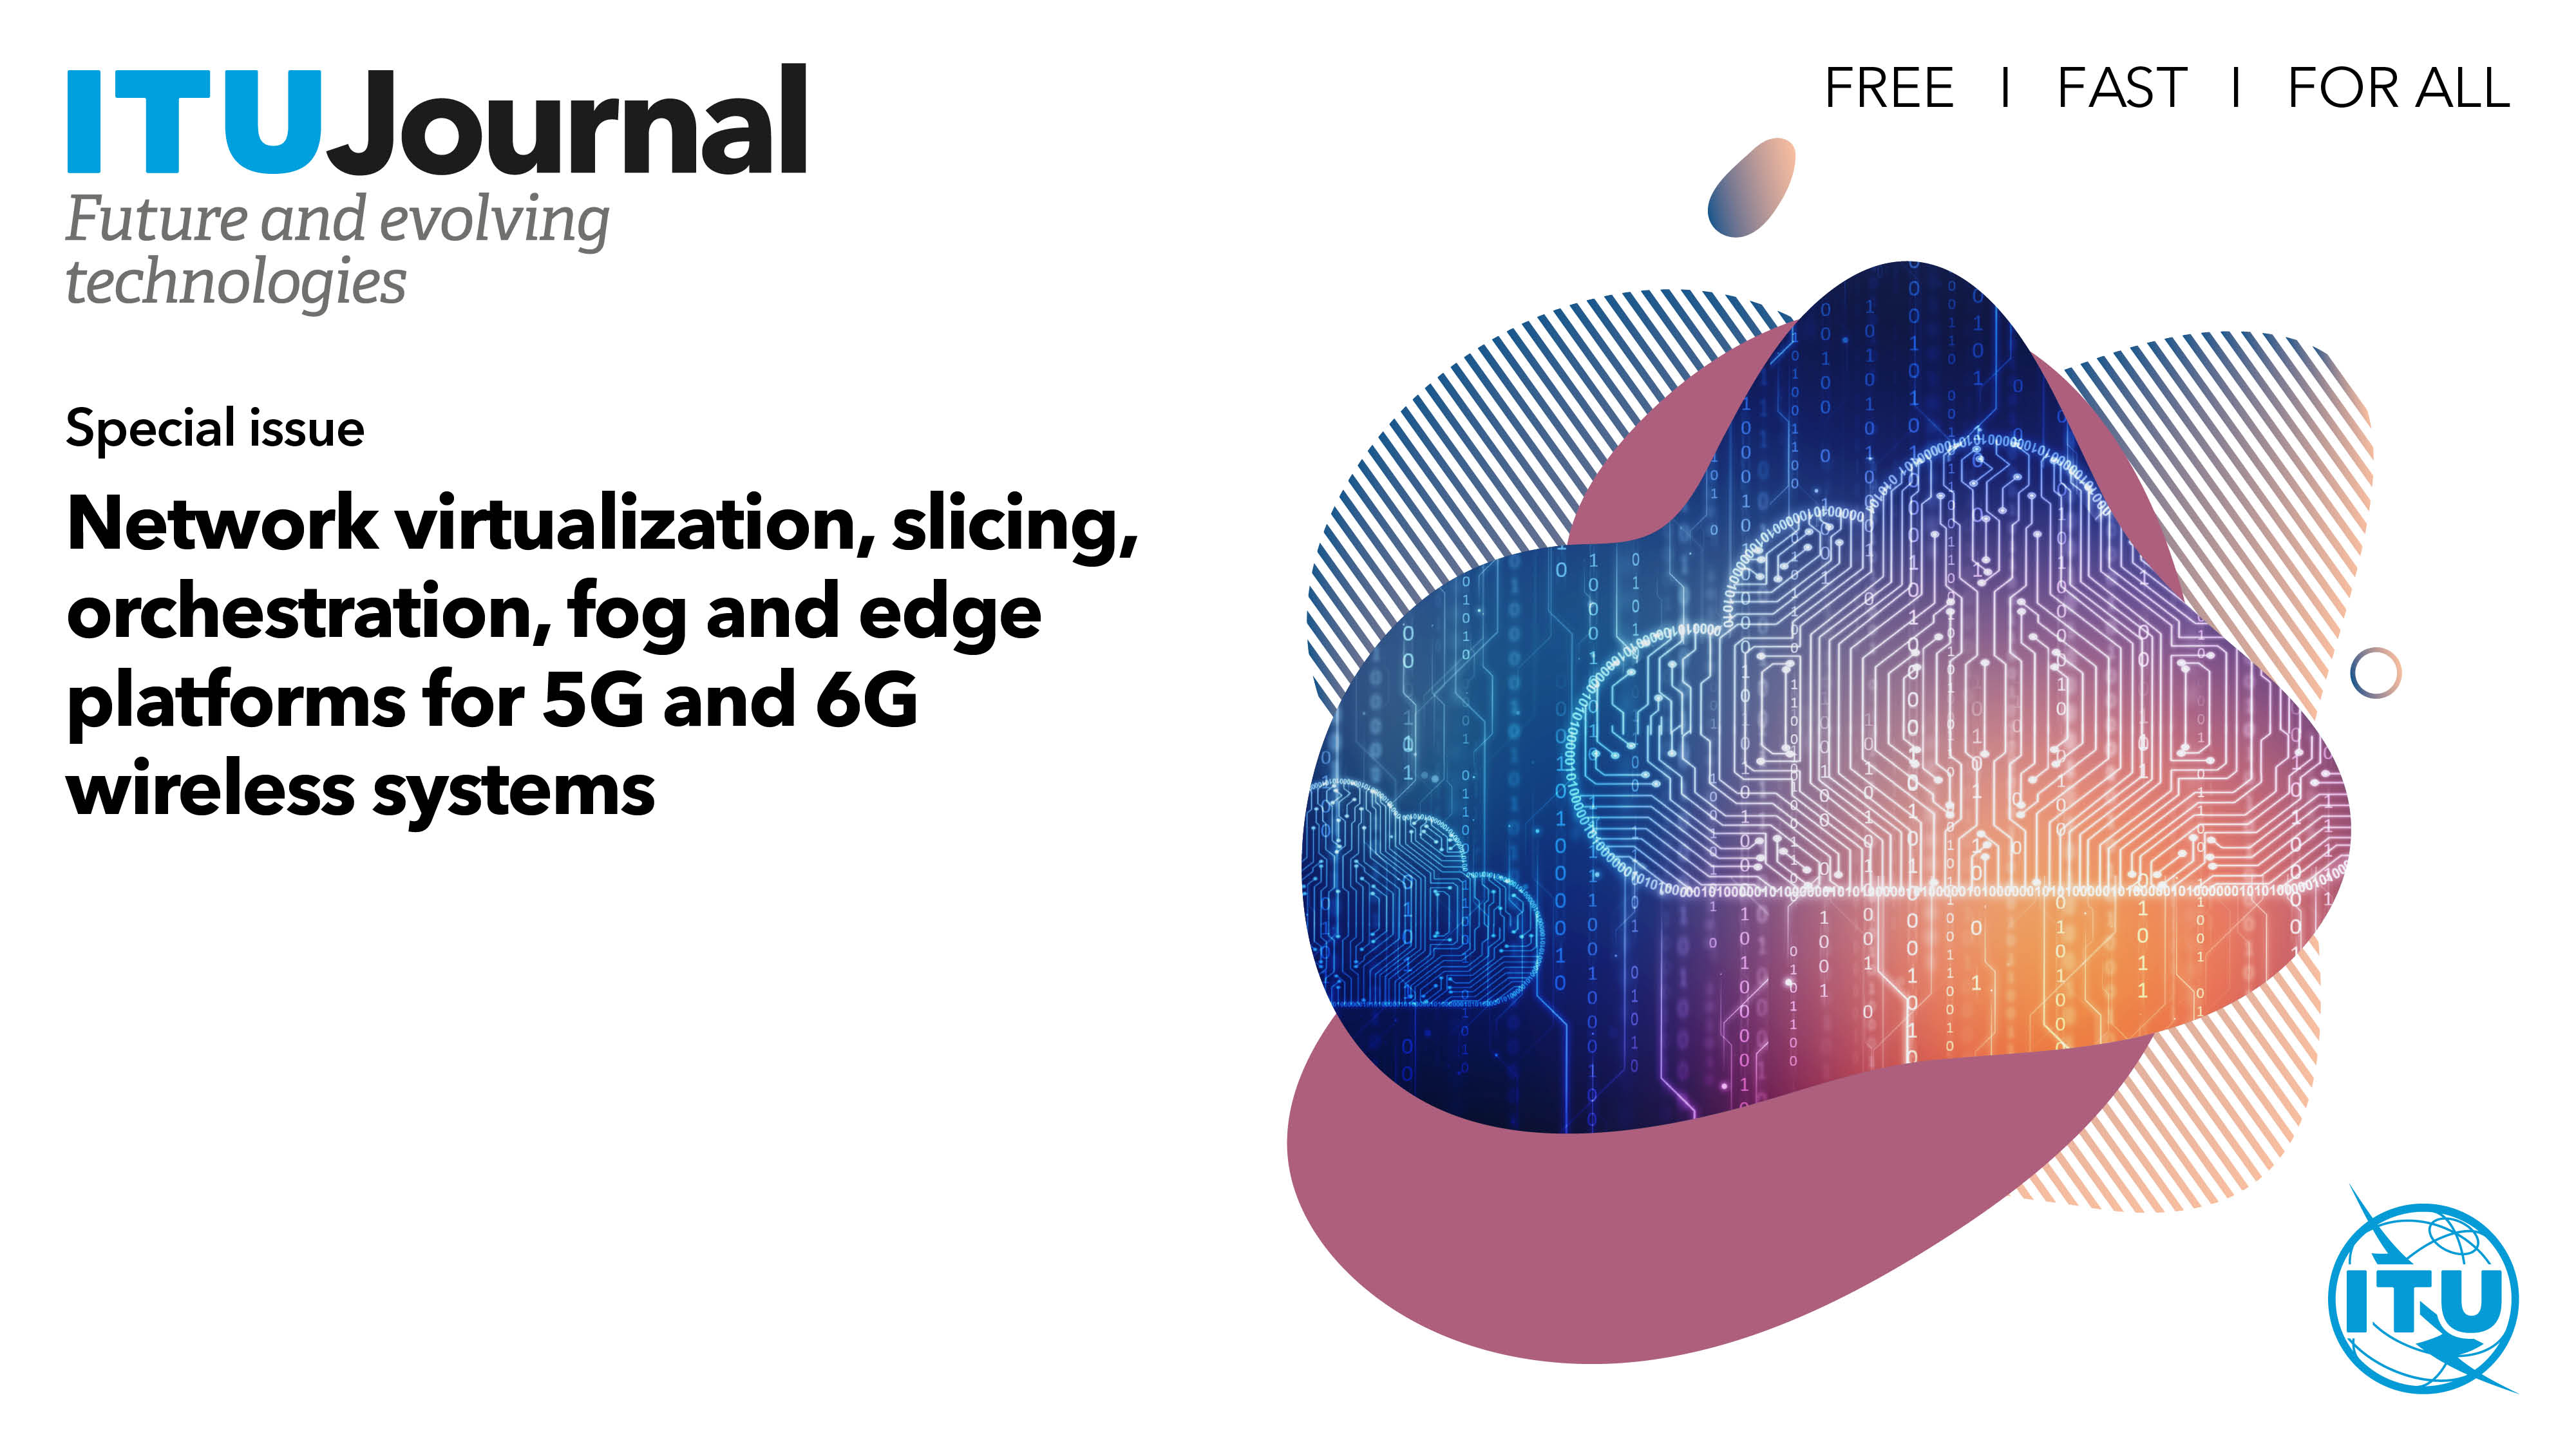 Special issue on 5G and 6G wireless systems